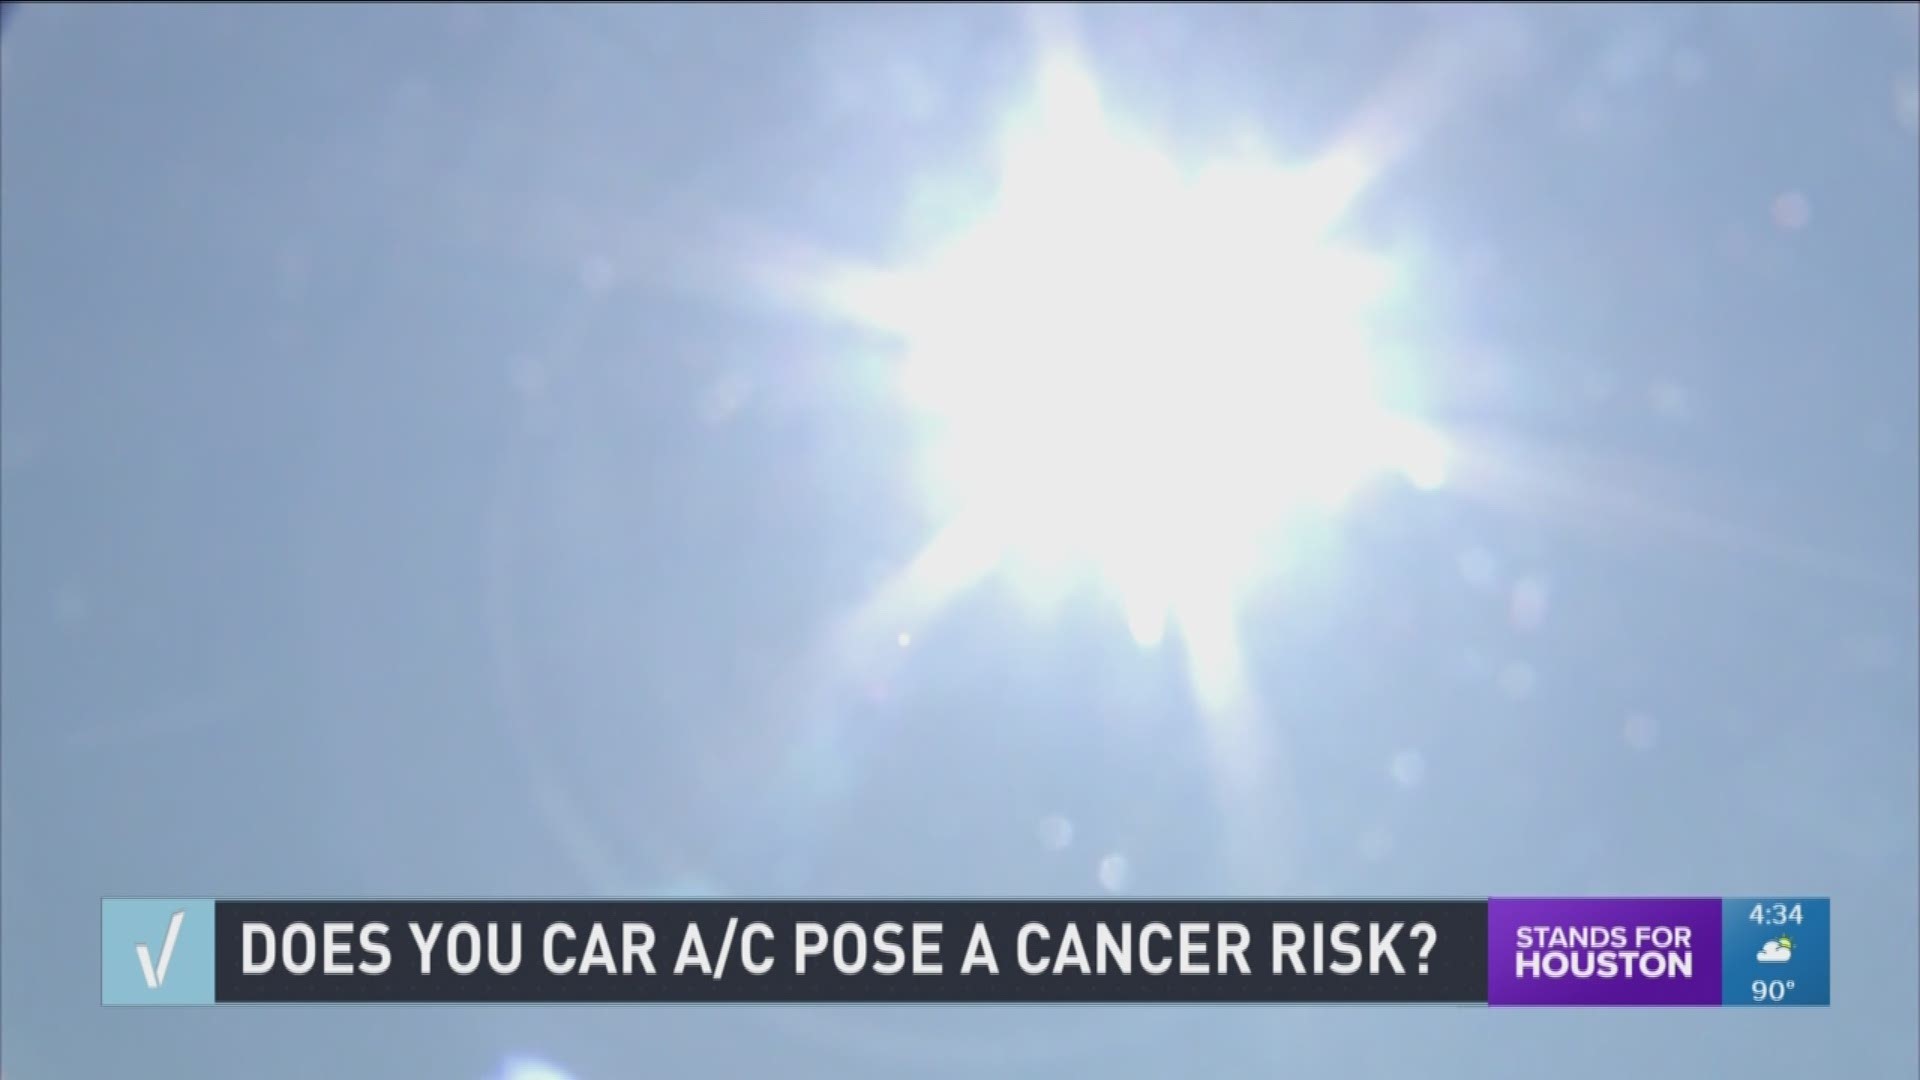 We're looking into claims that a vehicle's air conditioner can pose a cancer risk to drivers. 